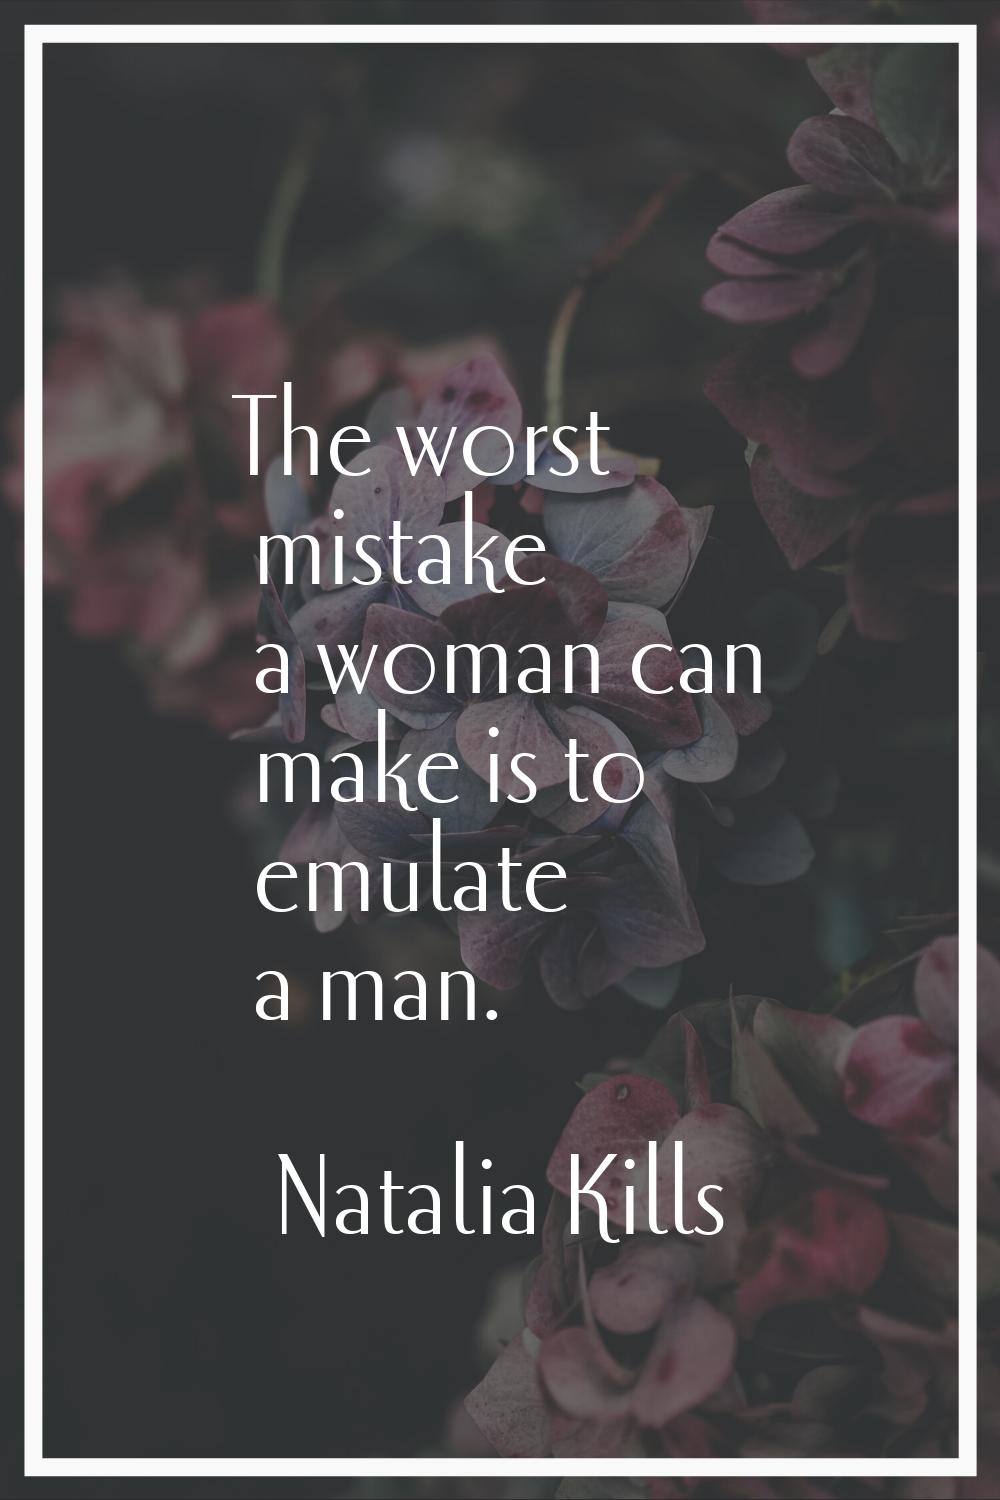 The worst mistake a woman can make is to emulate a man.